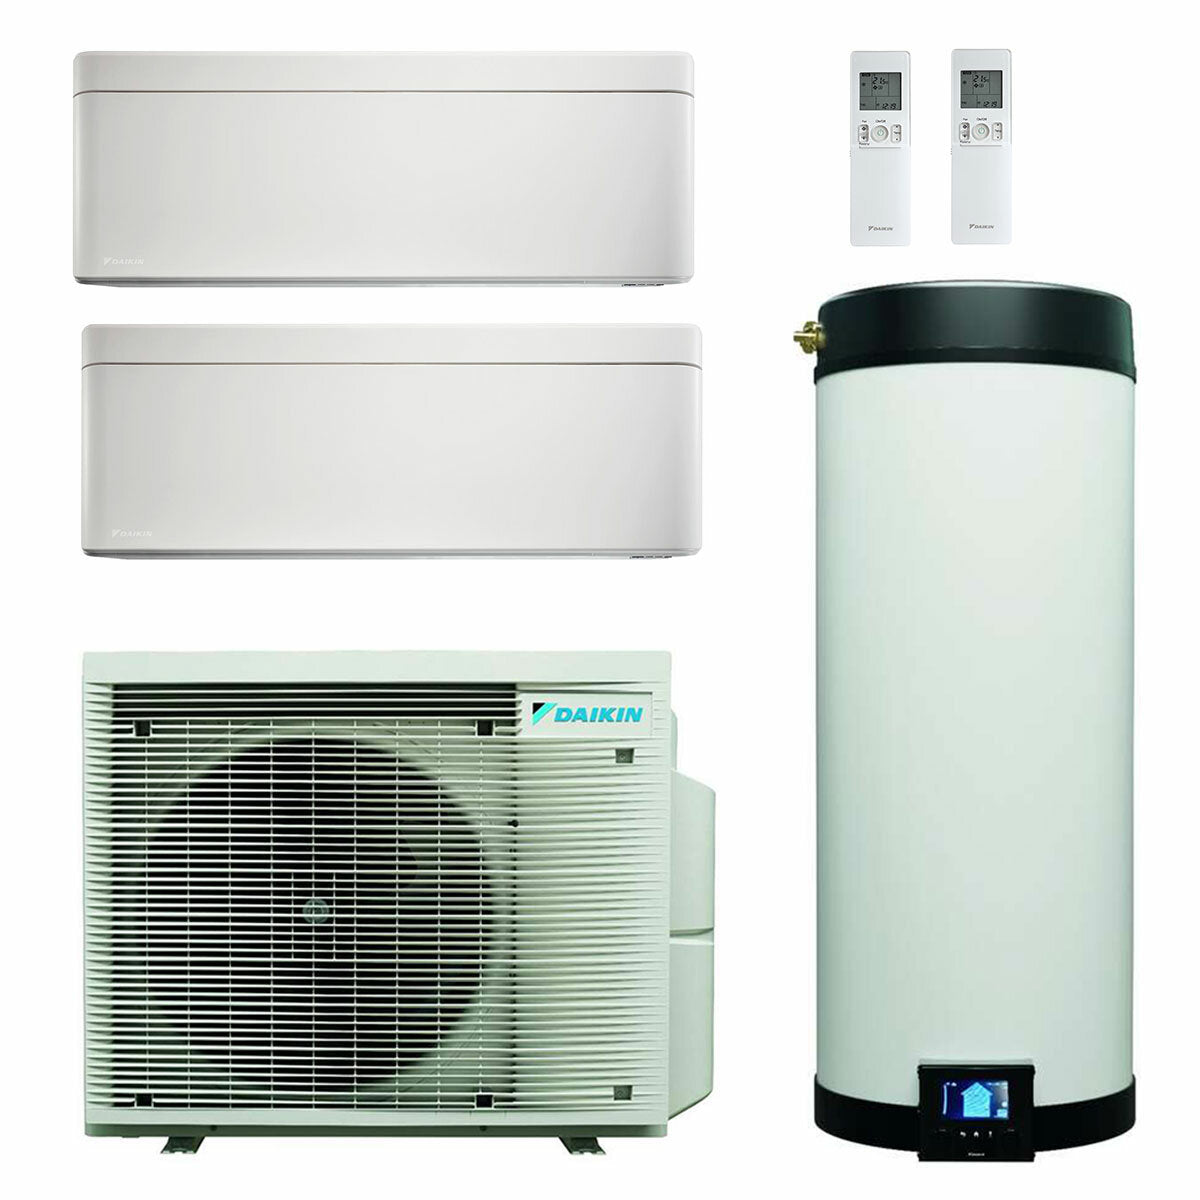 Daikin Multi+ dual split air conditioning system and domestic hot water - Stylish white indoor units 9000+9000 BTU - 120 l tank